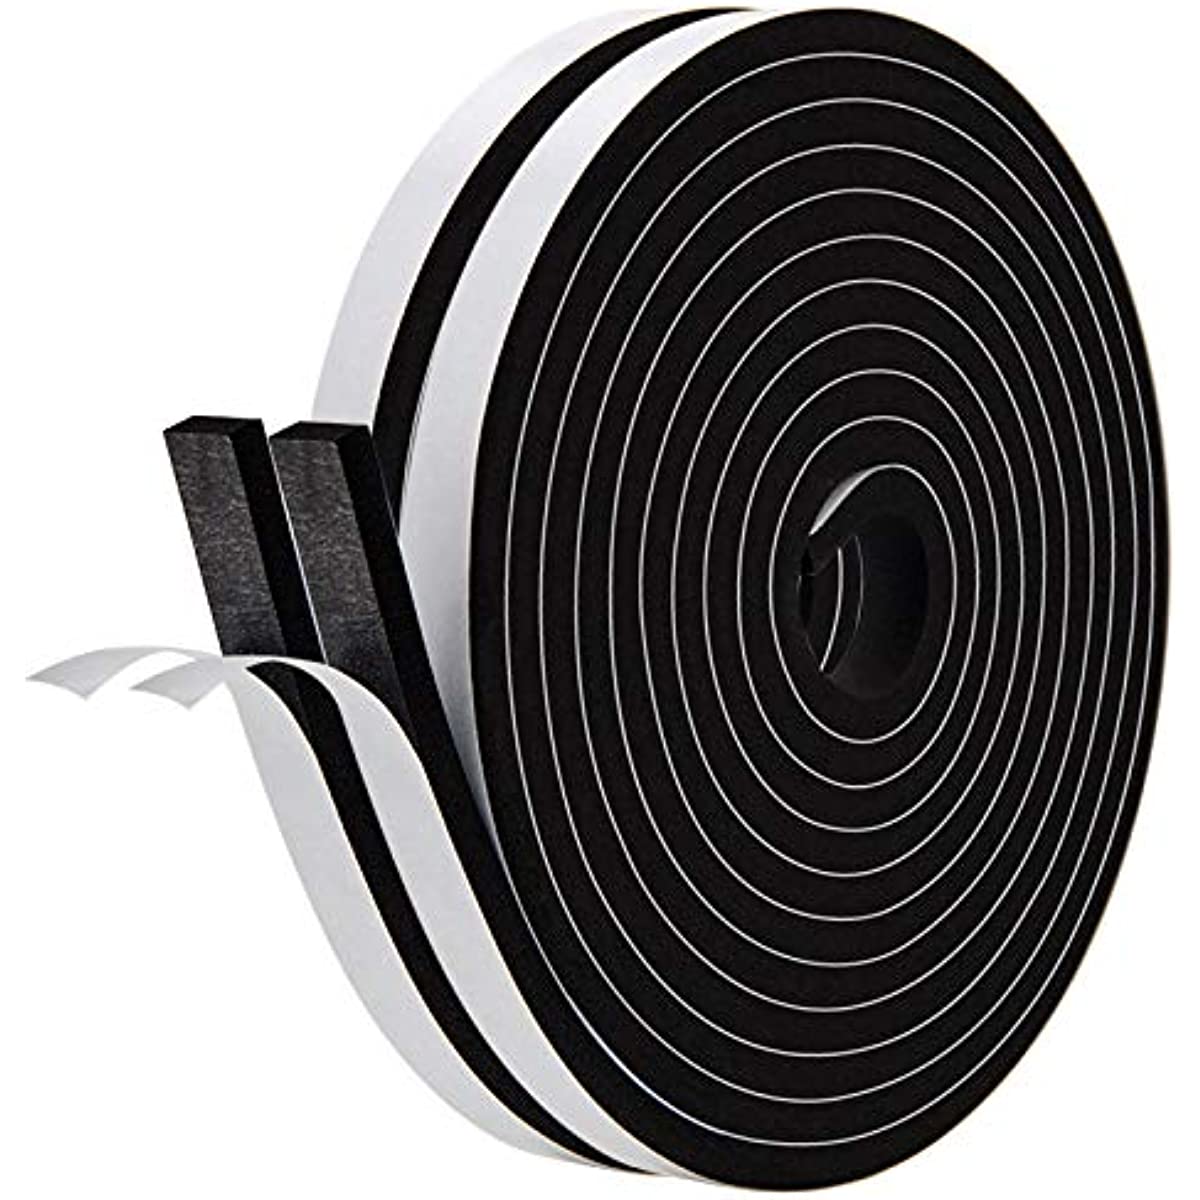 2 Rolls Weather Stripping,1/4 Inch Wide X 1/8 Inch Thick Foam Seal Tape  High Density Foam Strip Self Adhesive,Closed Cell Foam Tape Seal Strip,16  Feet